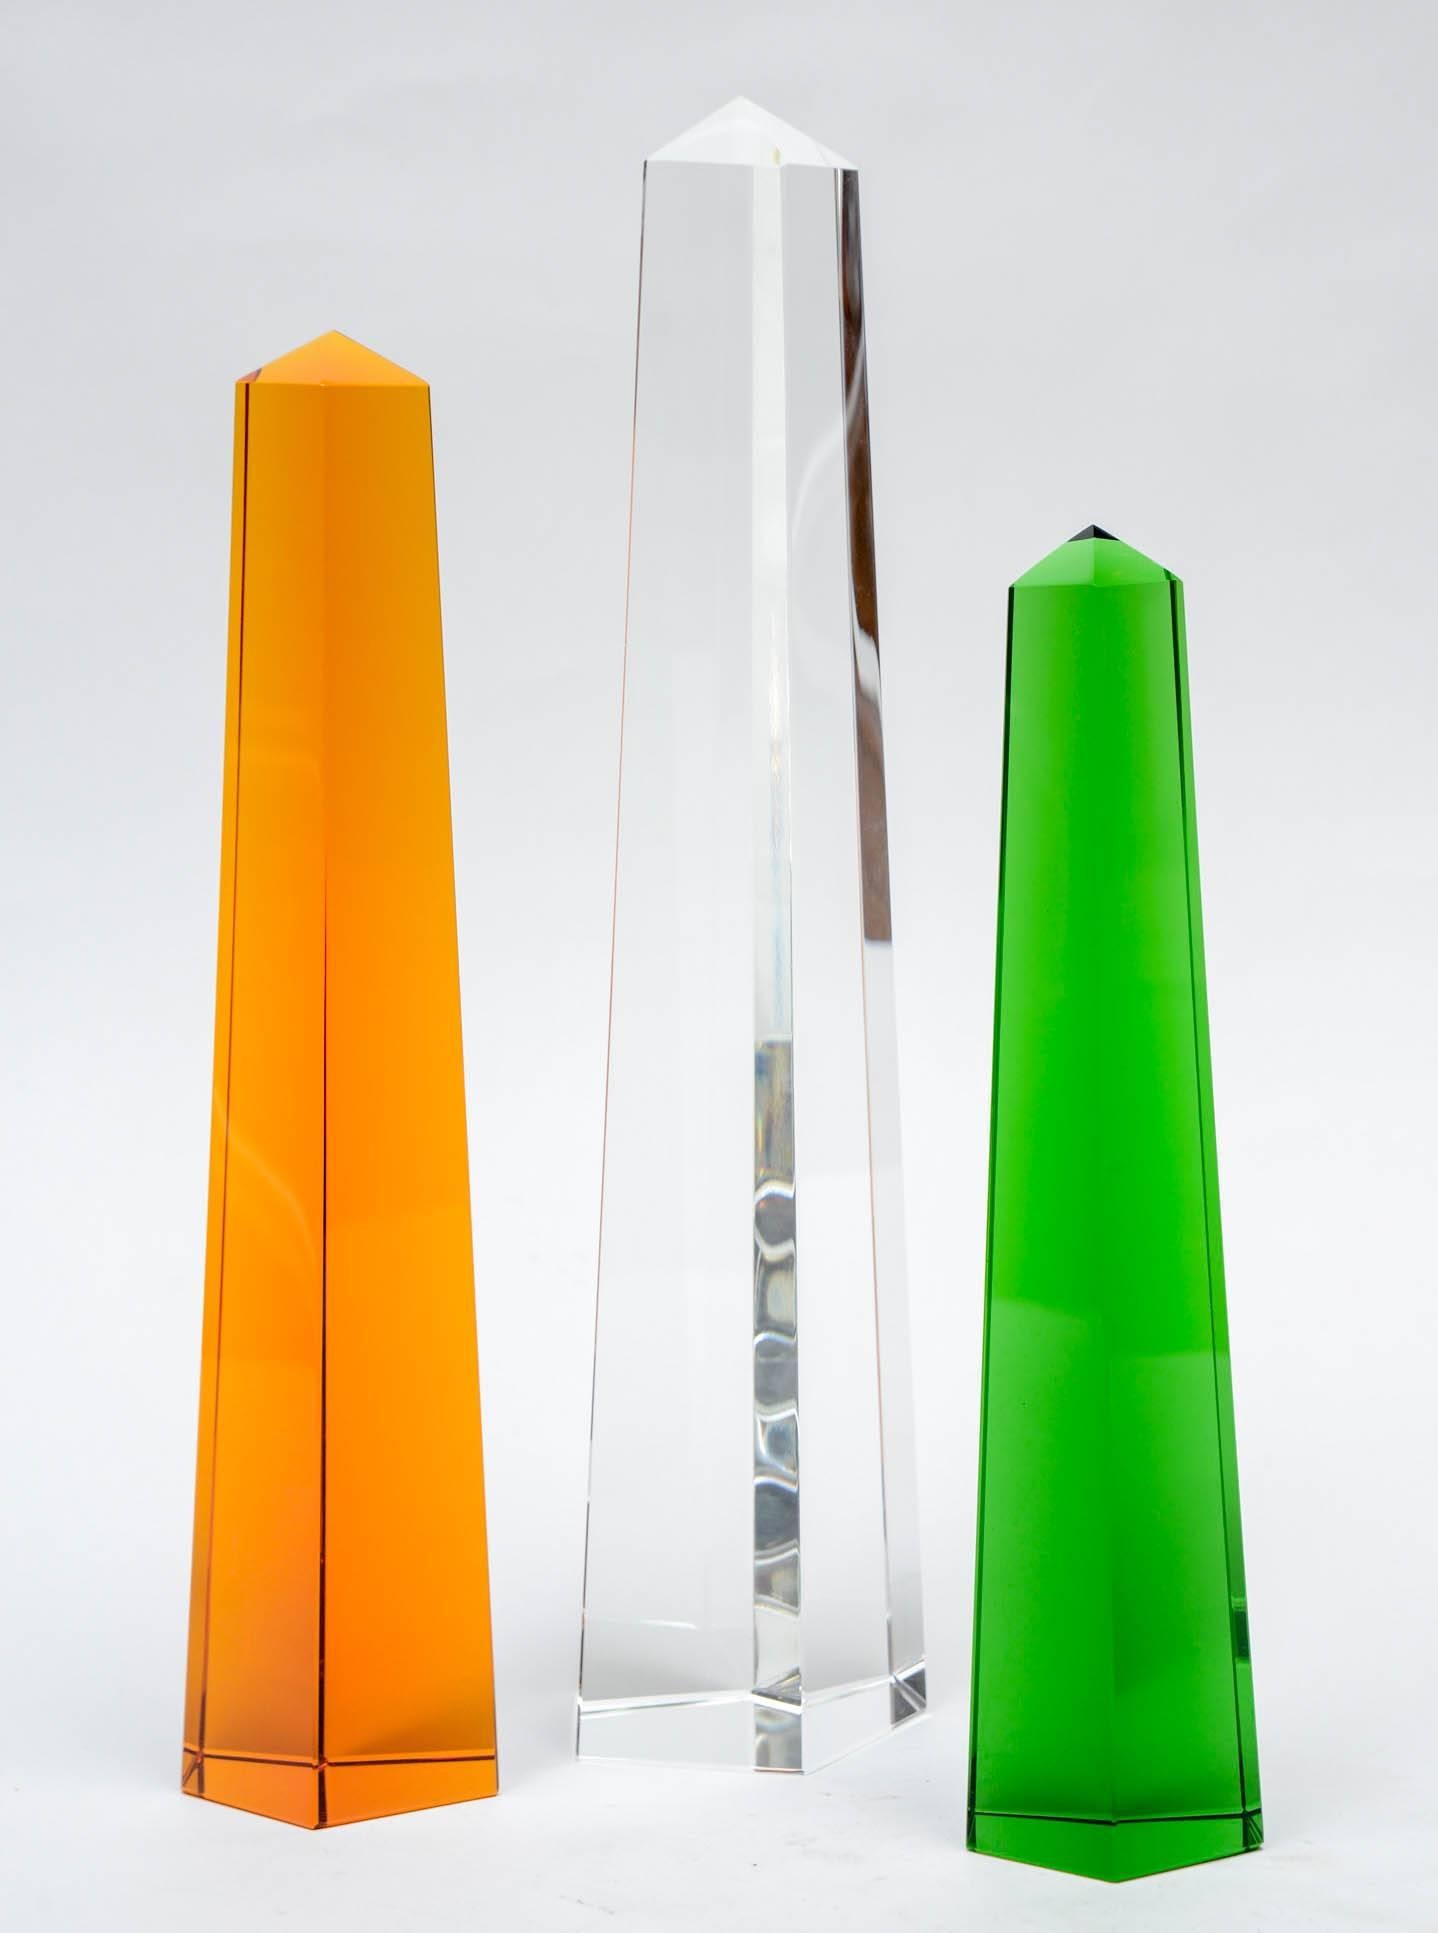 Set of three obelisks made of Murano glass in different colors.

Perfect condition.